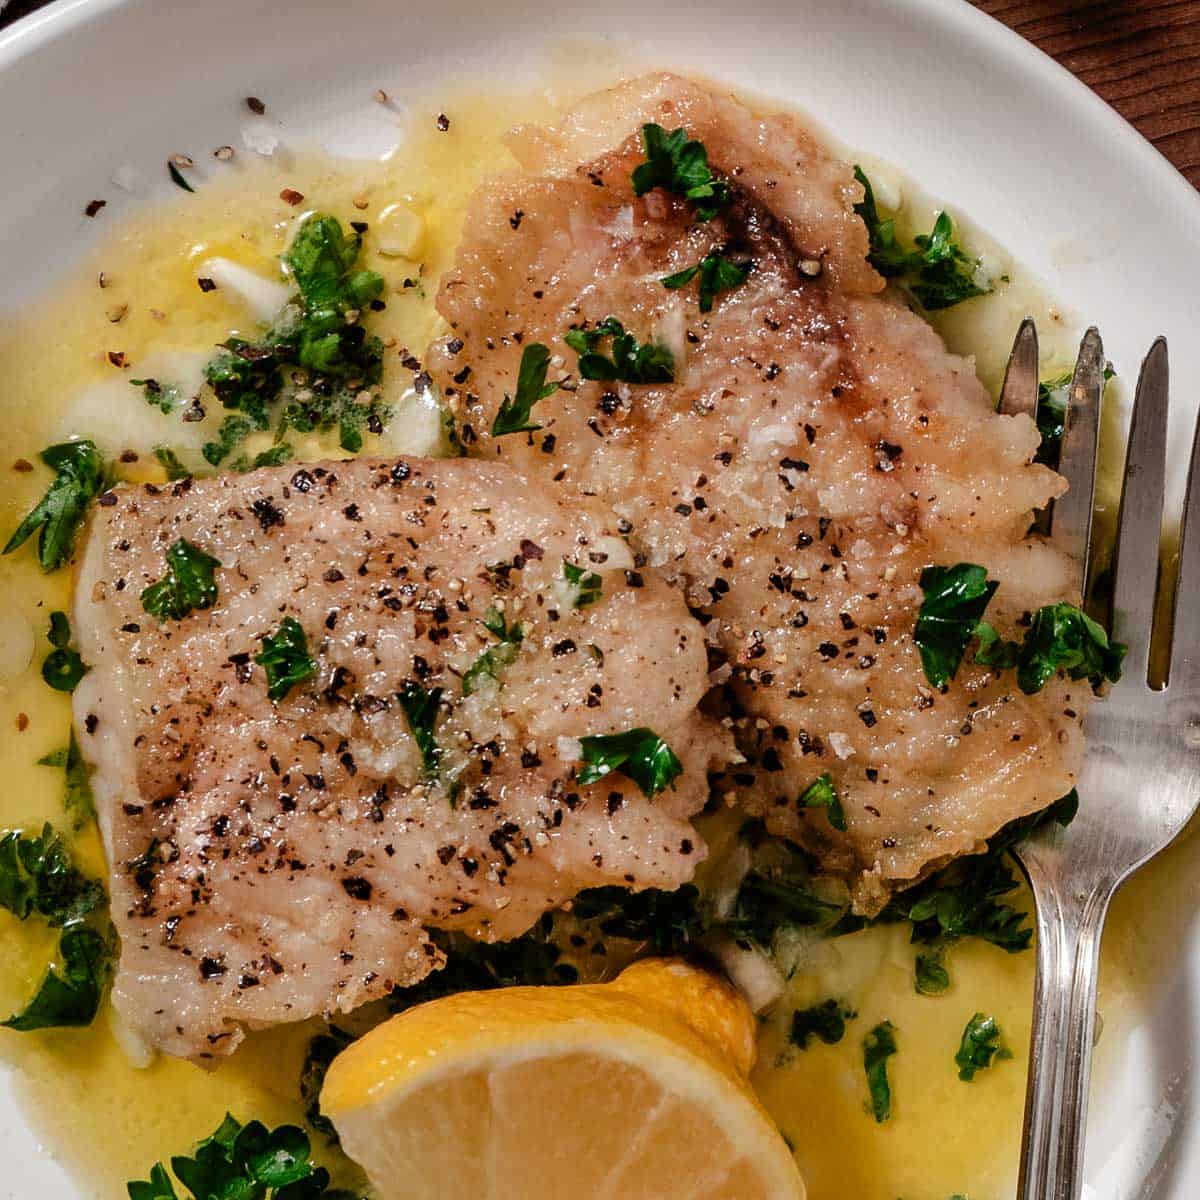 Tripletail fillet with lemon and butter sauce.